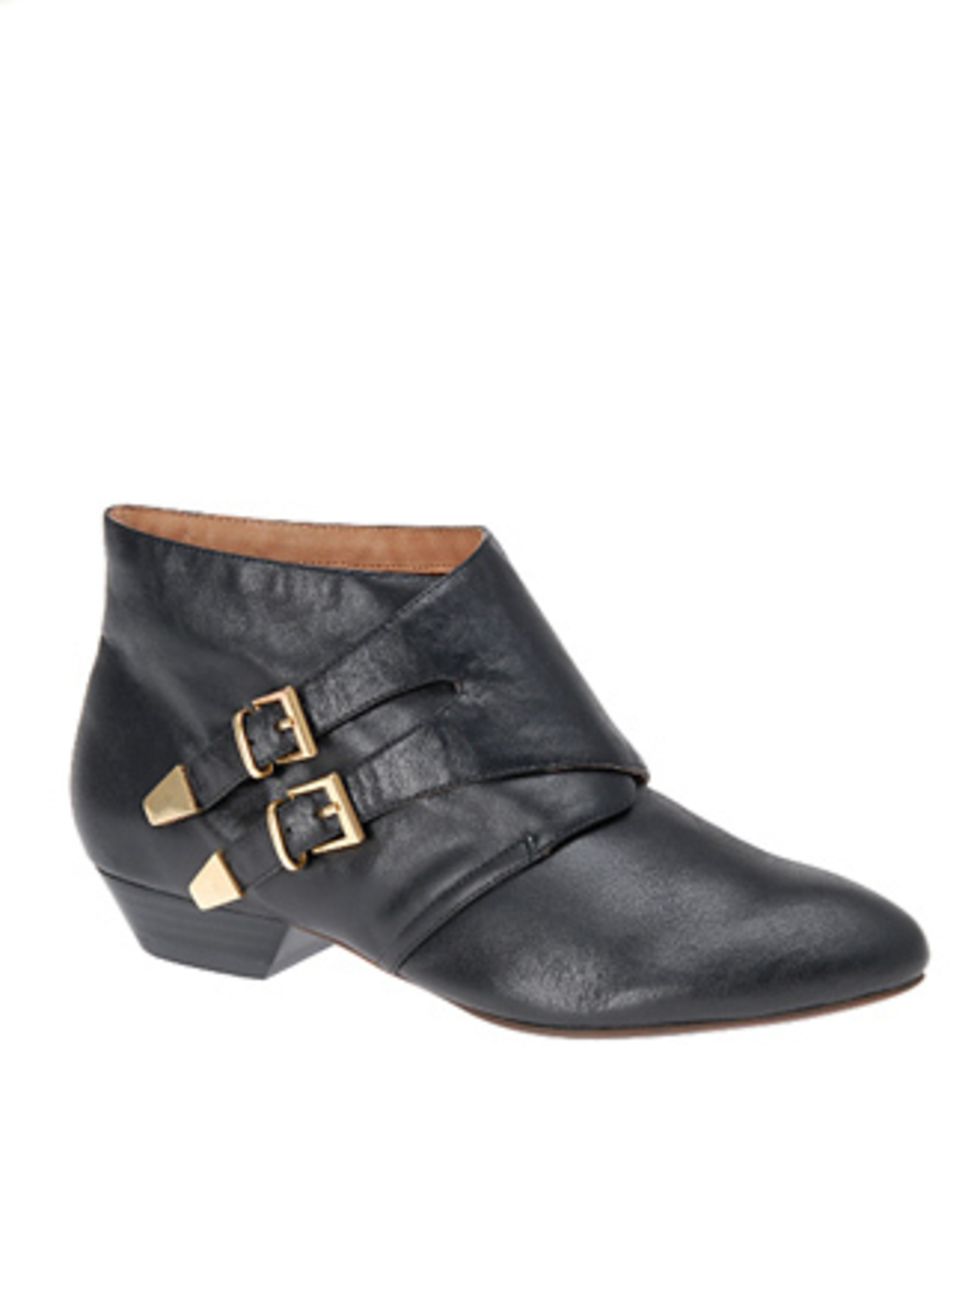 <p>Face it, spring/summer is unlikely to be a scorcher. These boots will add instant cool points to jeans, leggings and tea dresses for months to come.</p><p>Boots, £80 by <a href="http://www.aldoshoes.com/uk/women/shoes/flats/77445227-alvira/97">Aldo</a>